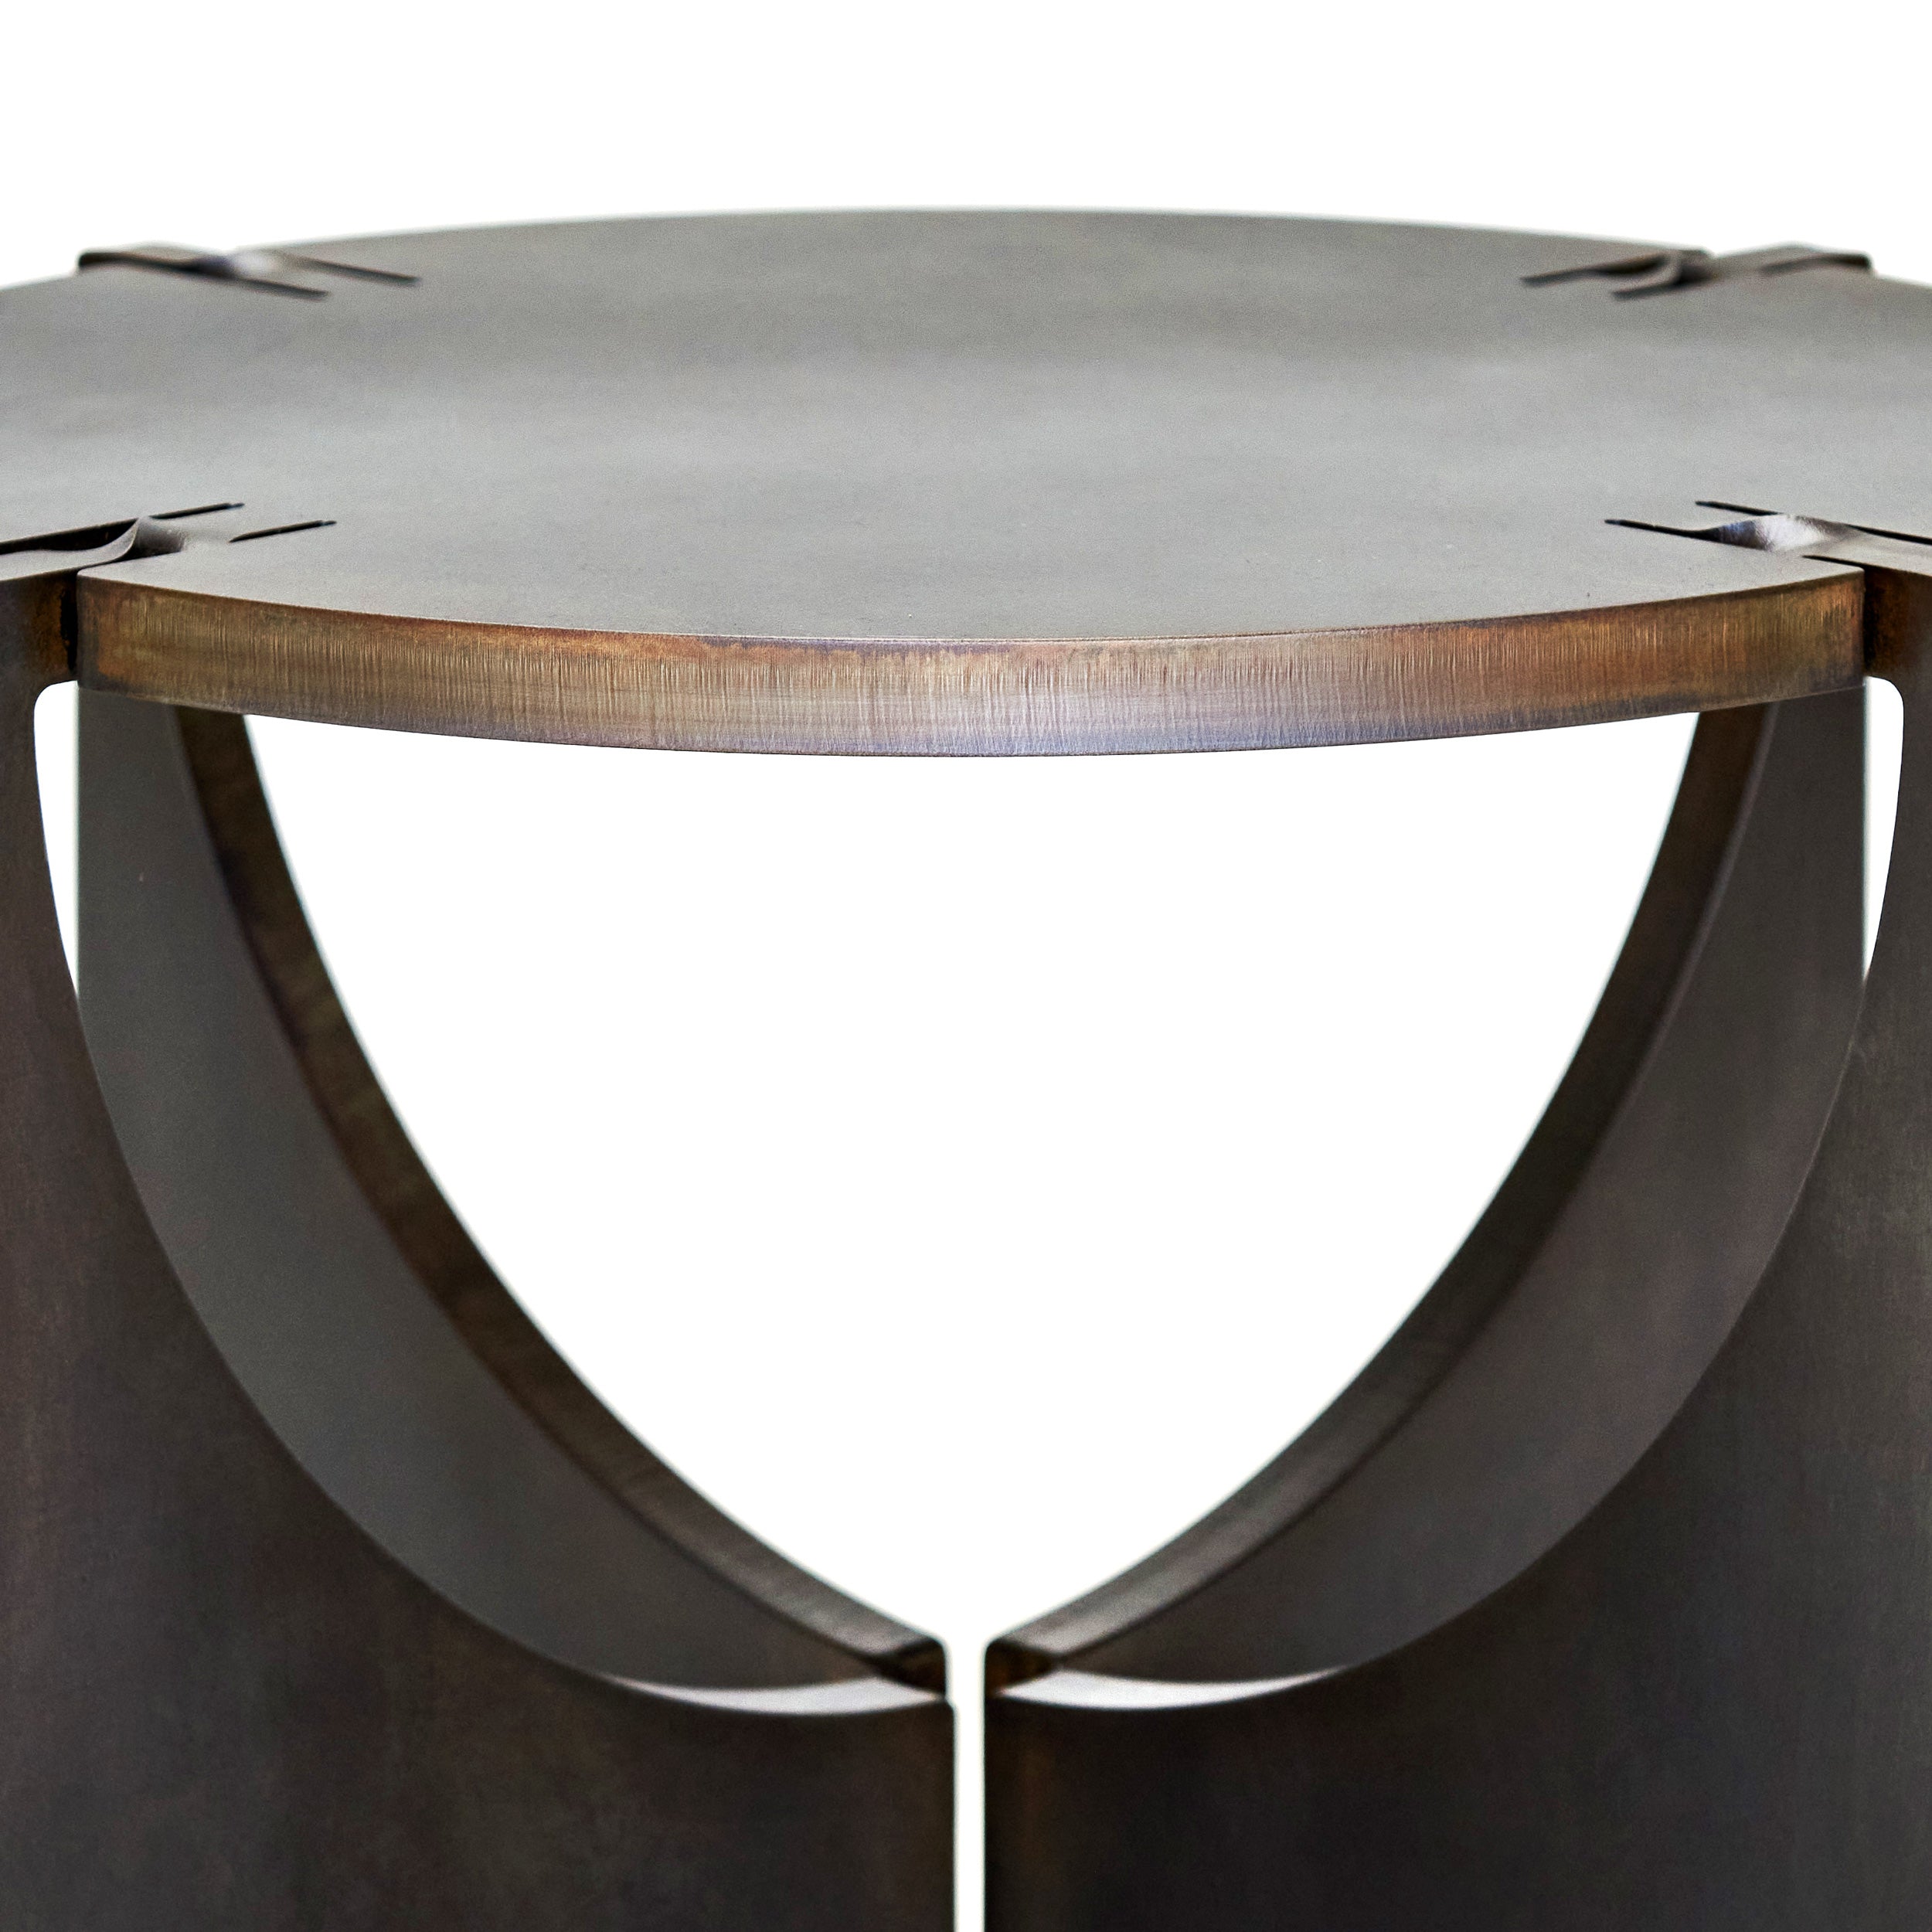 ONE Round Steel Table with Black Oxide patina by Frank Penders